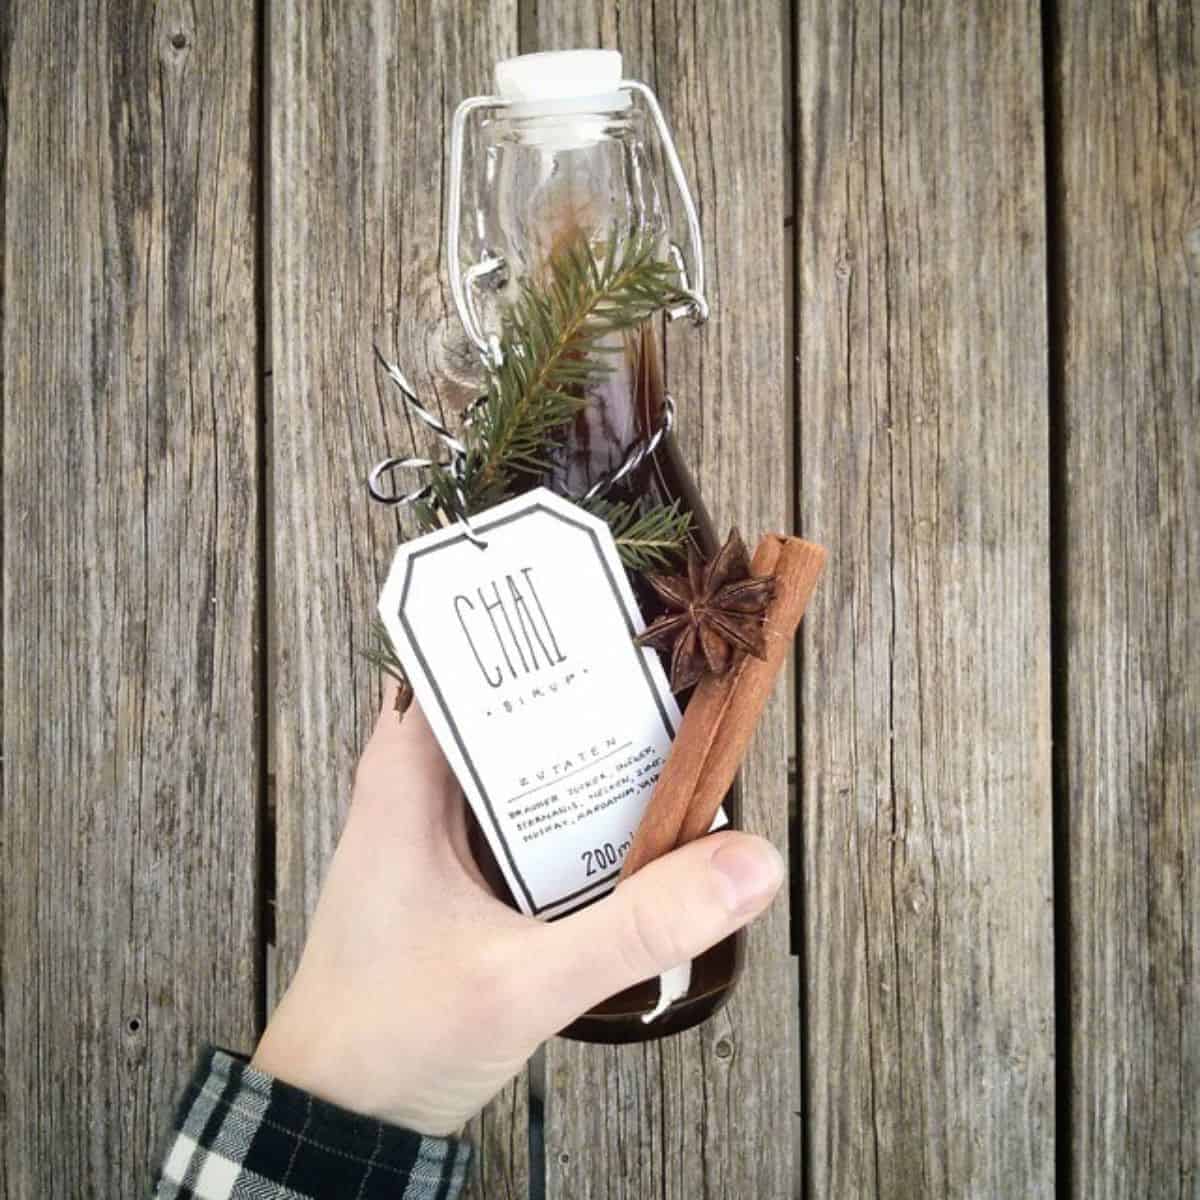  A hand holding a cute bottle of homemade Chai syrup with a pretty tag and decor